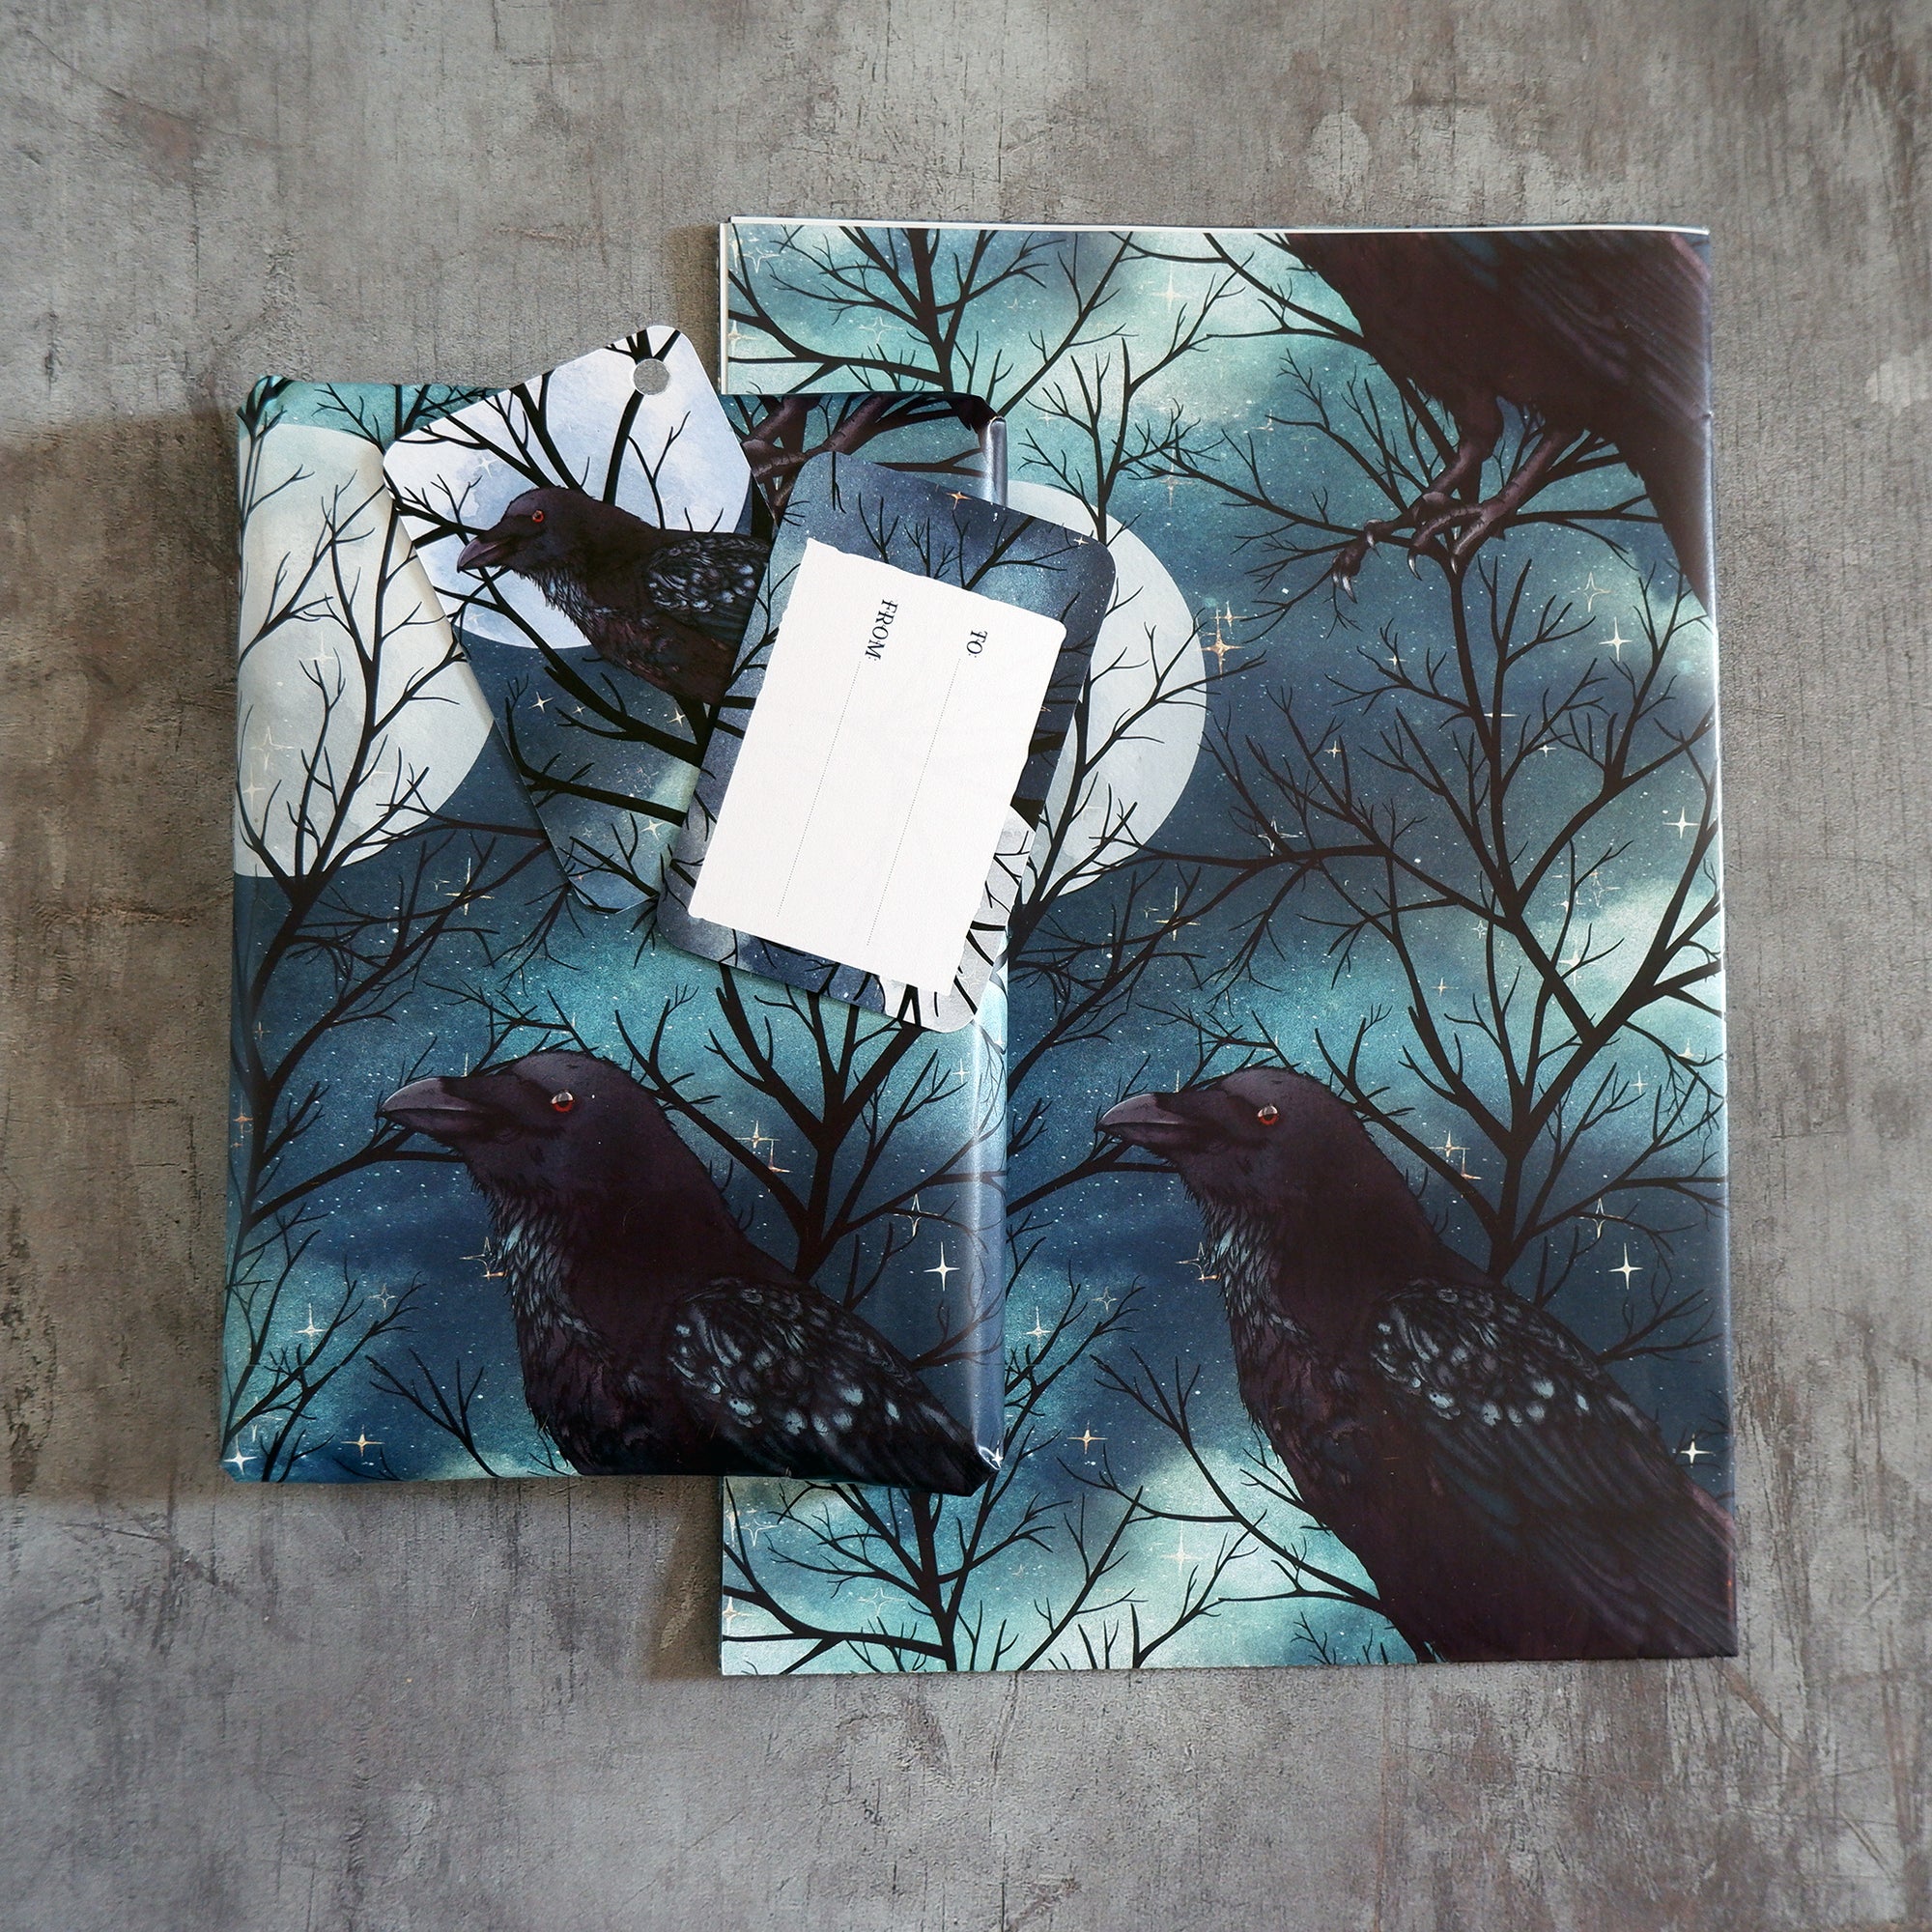 Raven and Moon Gift Wrapping Paper